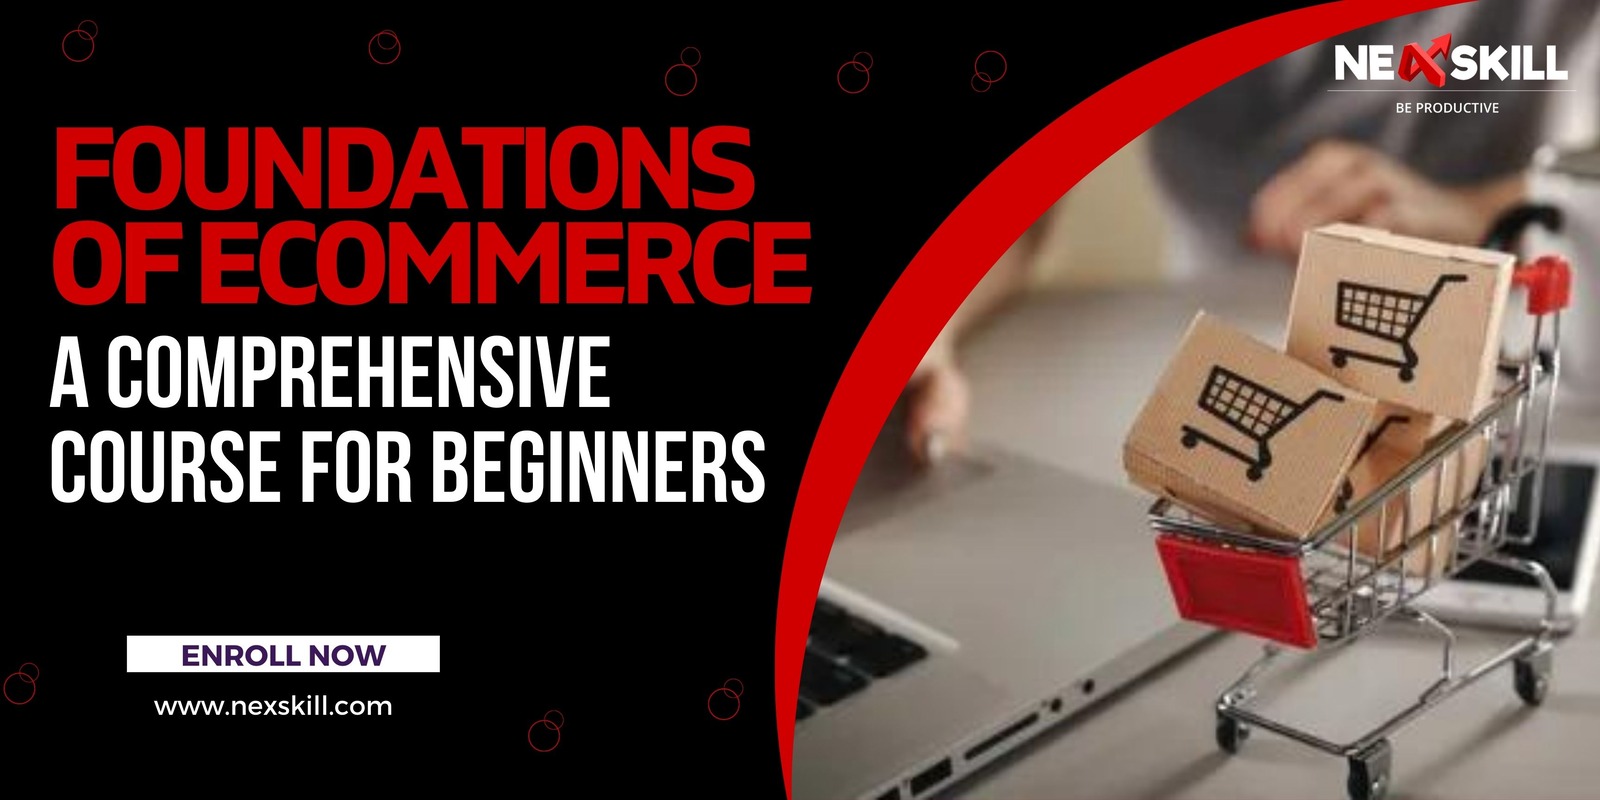  Foundations of Ecommerce: A Comprehensive Course for Beginners